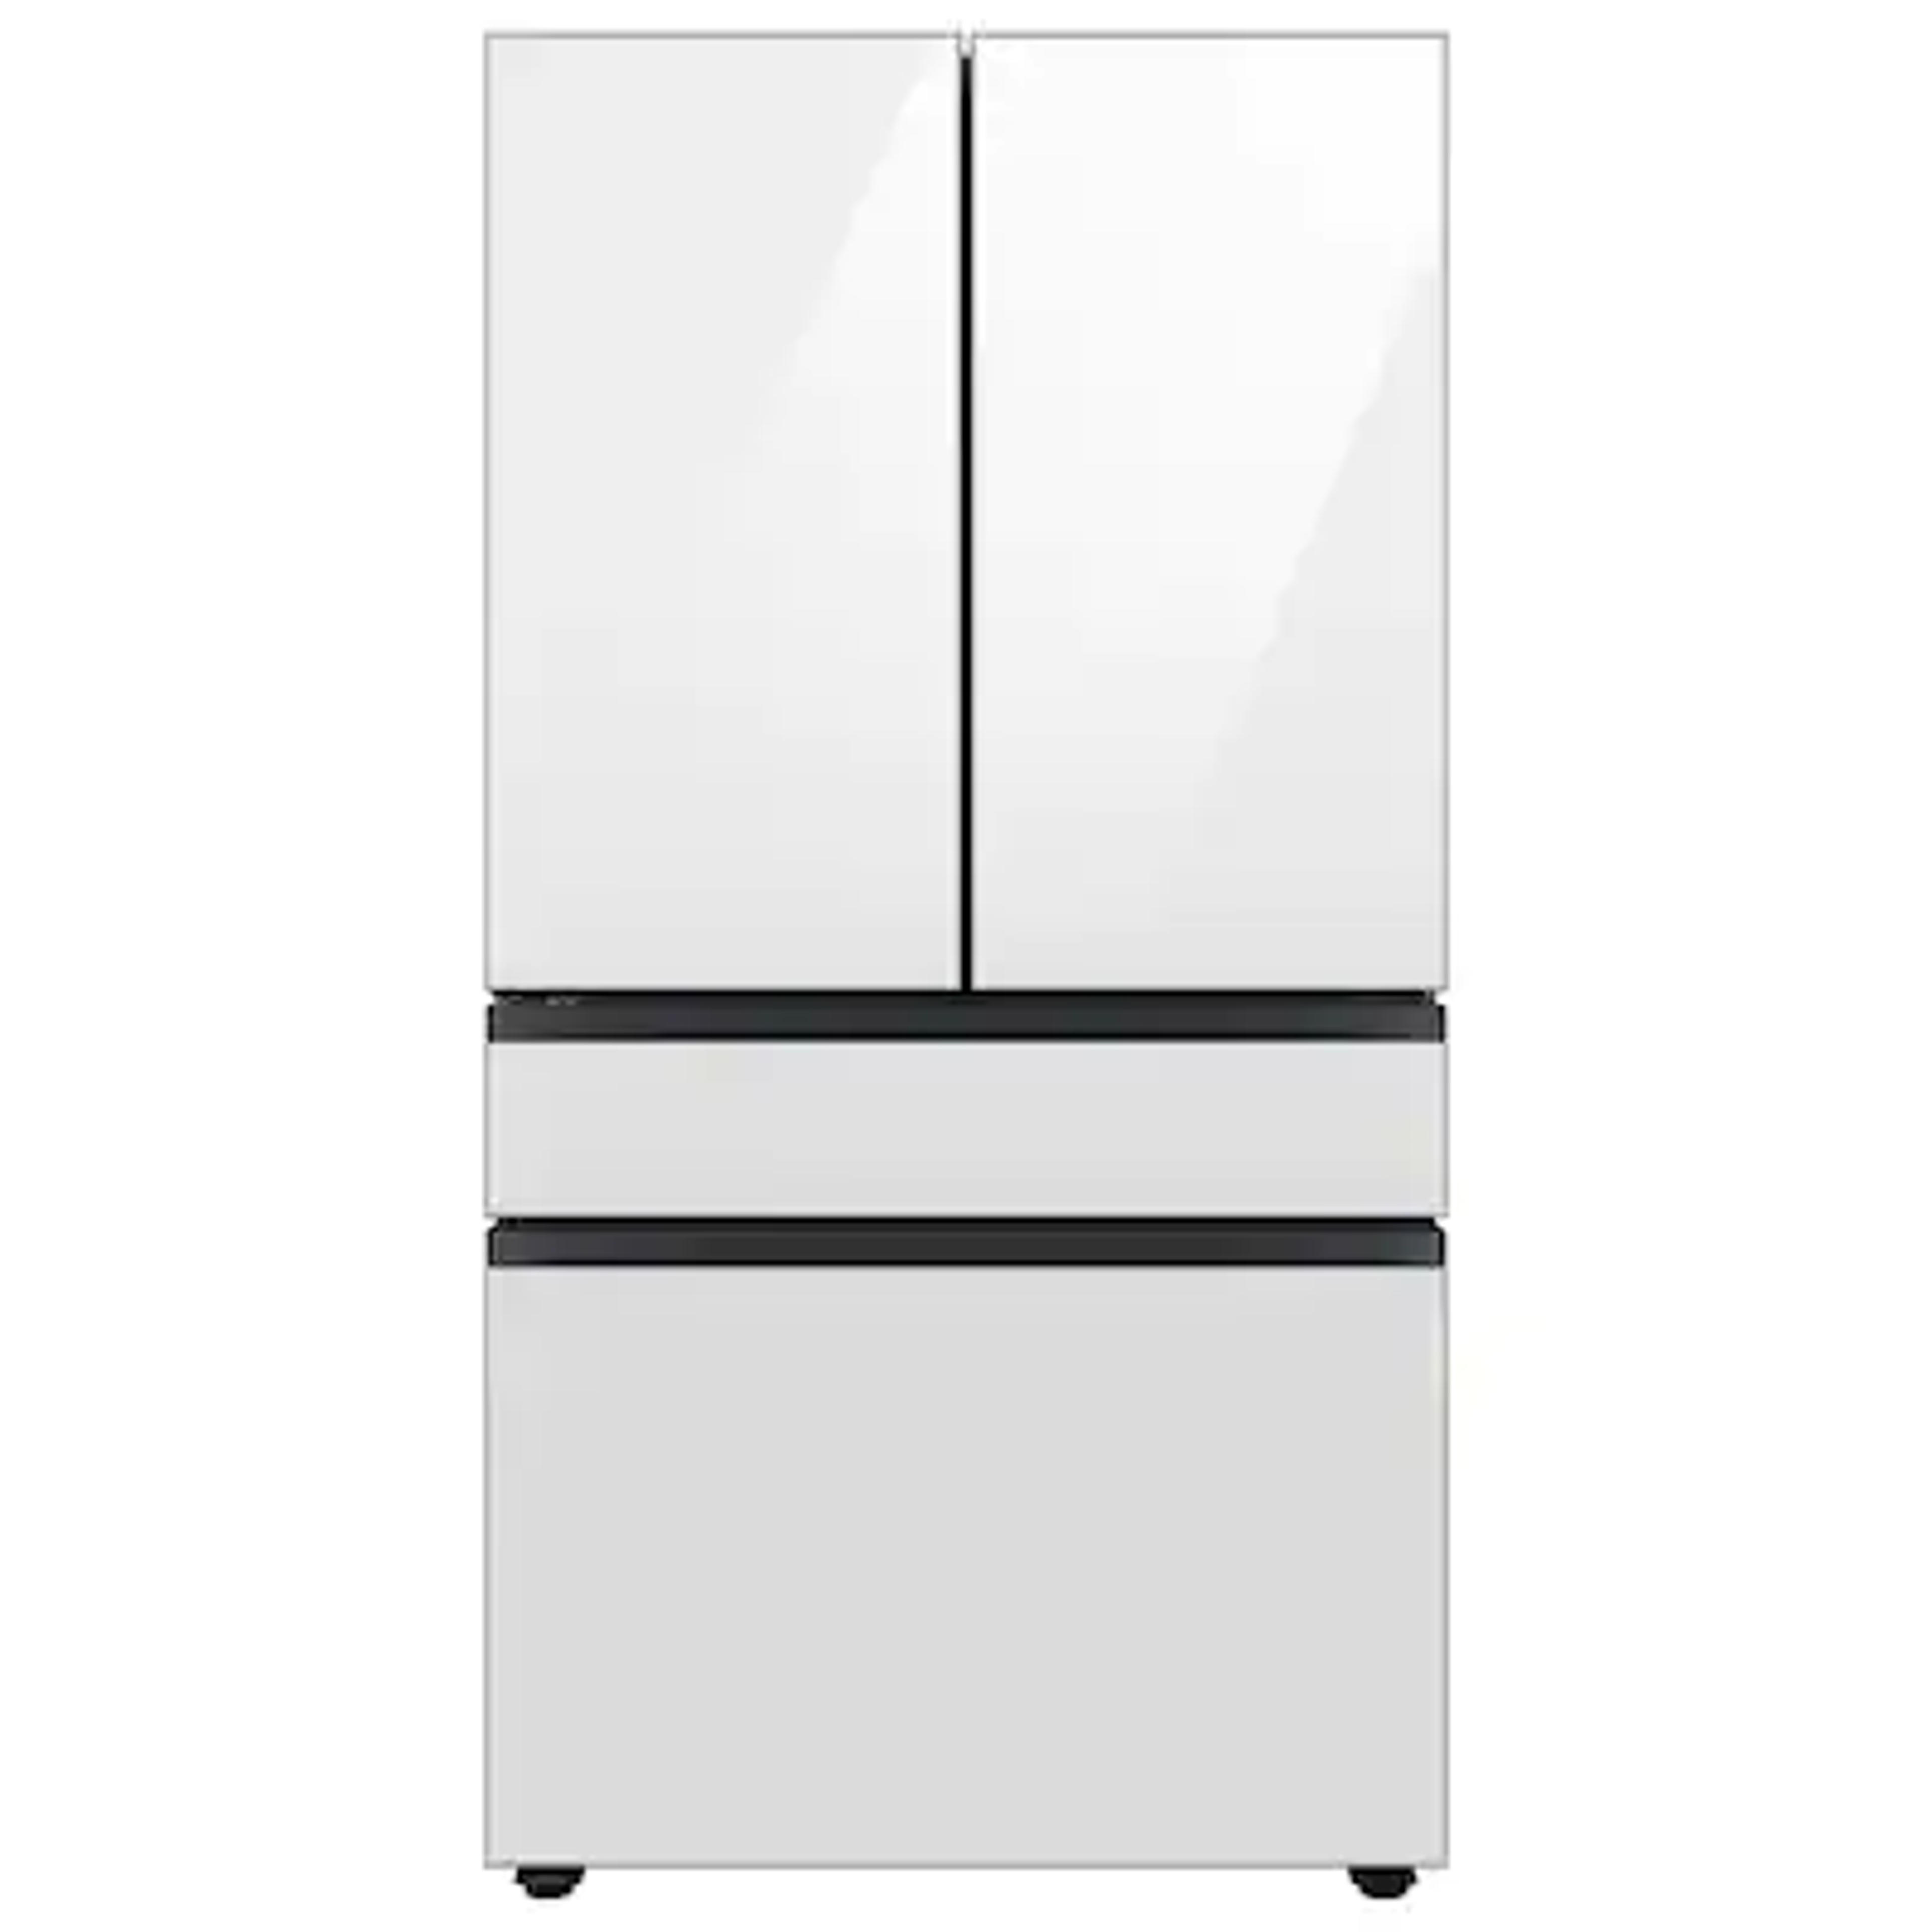 Samsung Bespoke 28.9-cu ft 4-Door French Door Refrigerator with Dual Ice Maker (White Glass- All Panels) ENERGY STAR in the French Door Refrigerators department at Lowes.com